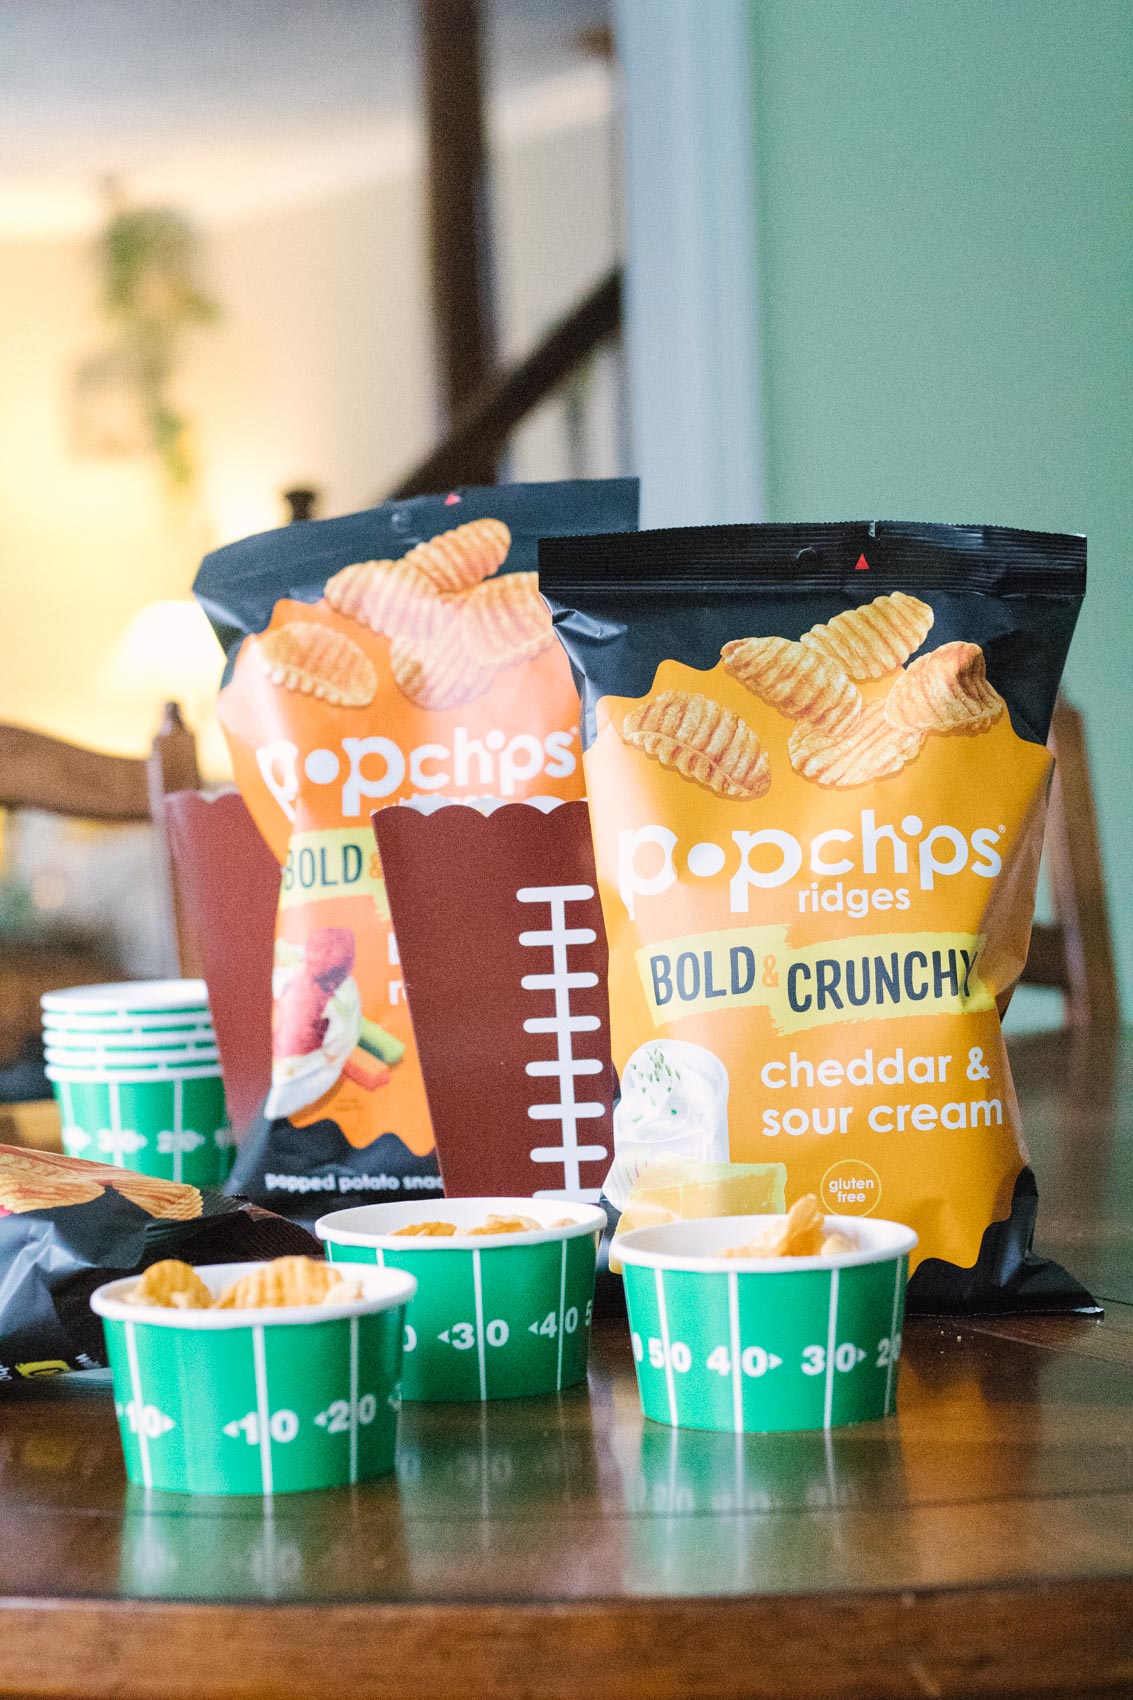 Snacks make me SO happy and while football isn't my favorite thing, I'll definitely show up for the food. Also known as gluten-free bags of goodness, popchips are a great pick for when you're deciding on ideas for Super Bowl snacks!